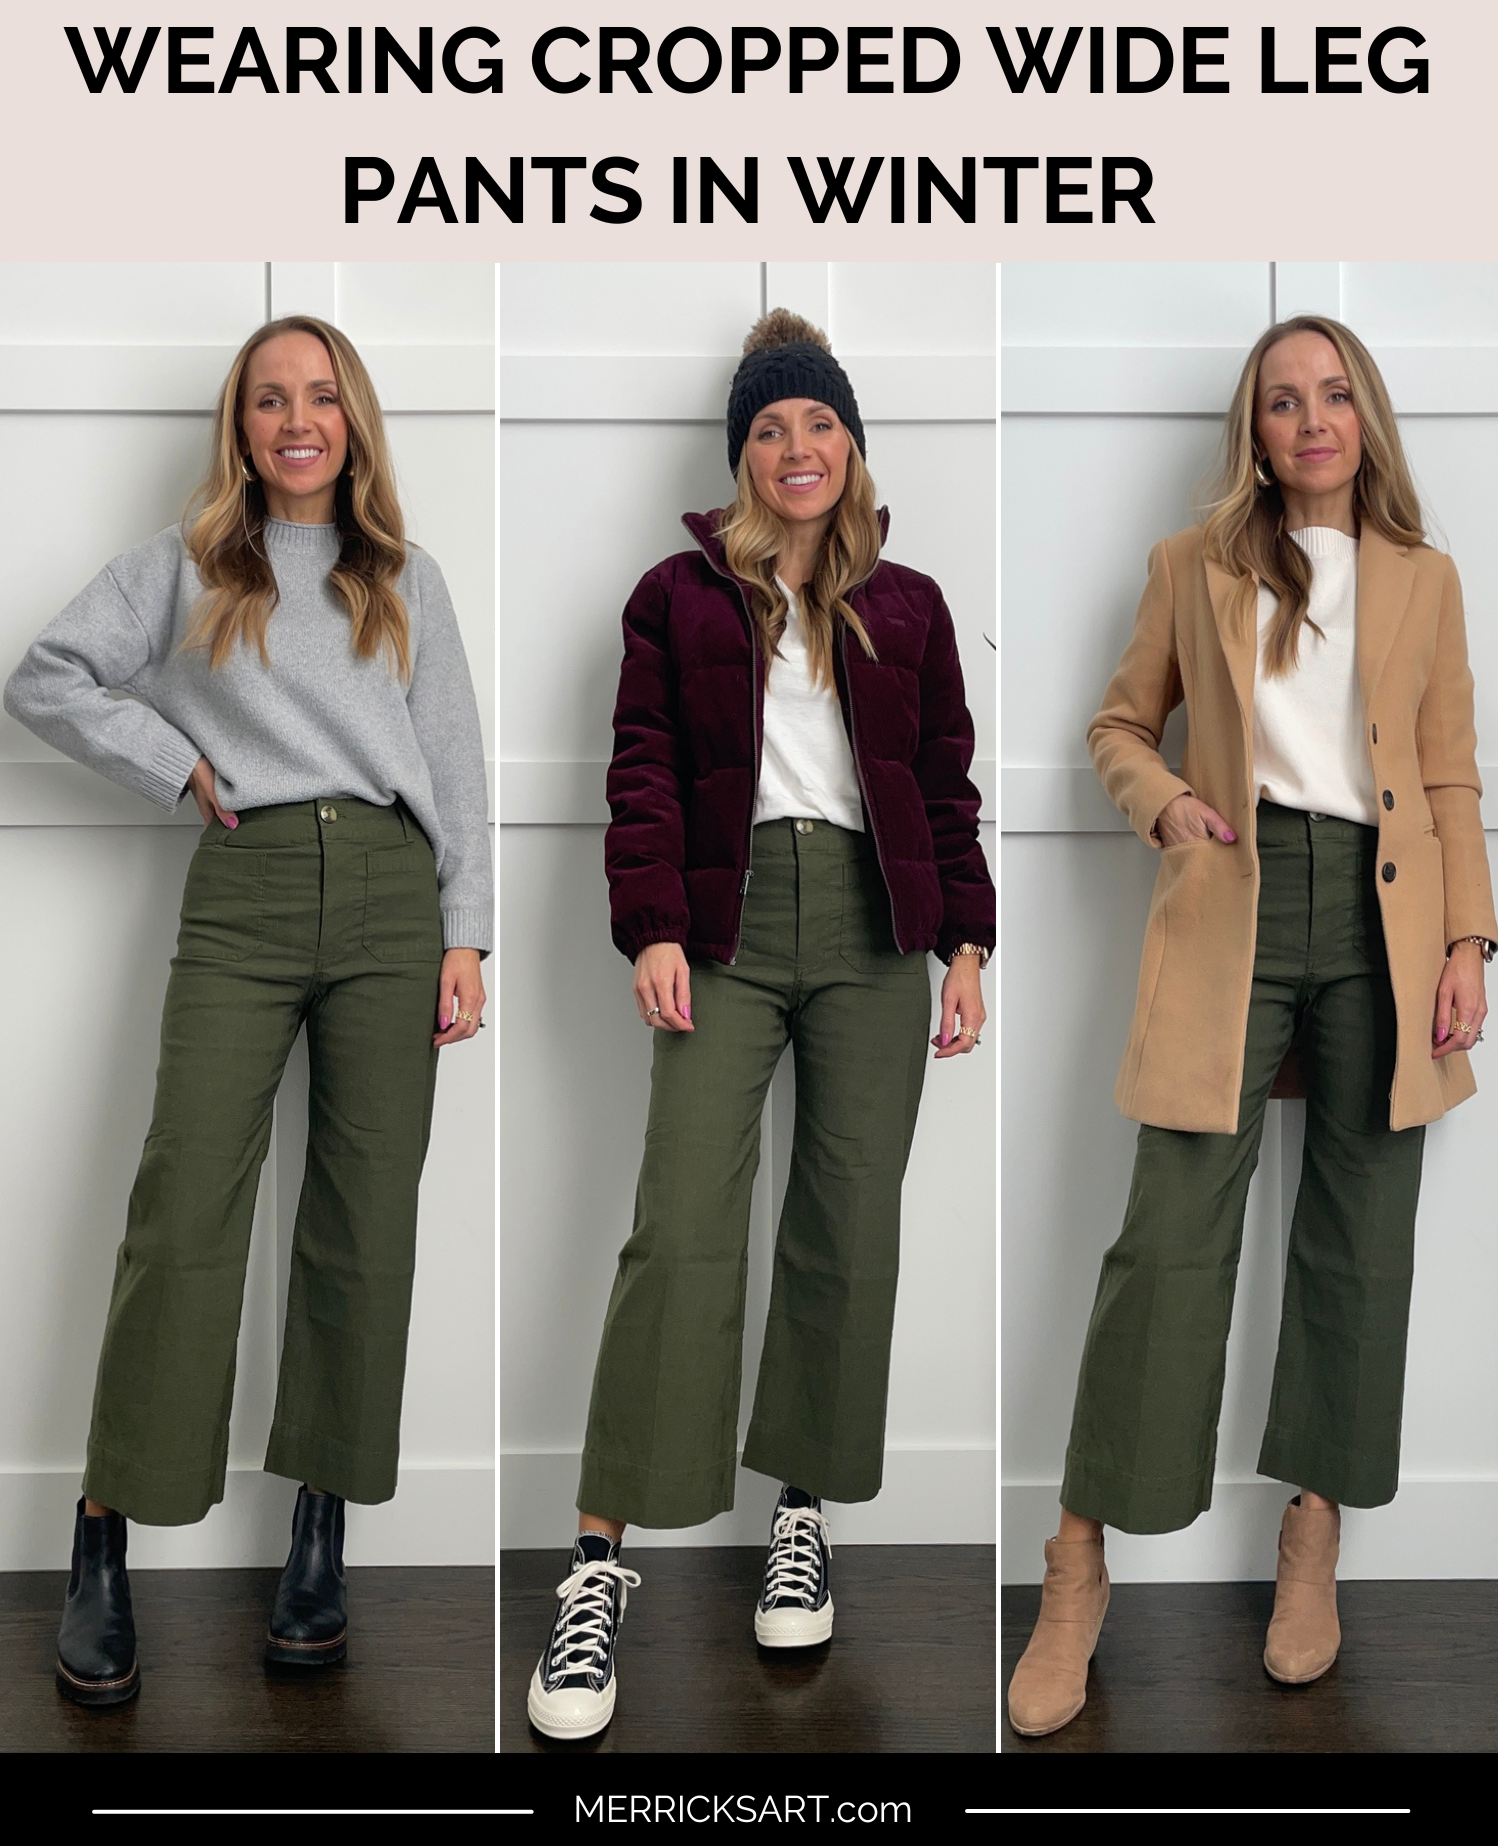 What Shoes To Wear With Wide Leg Pants In Winter?